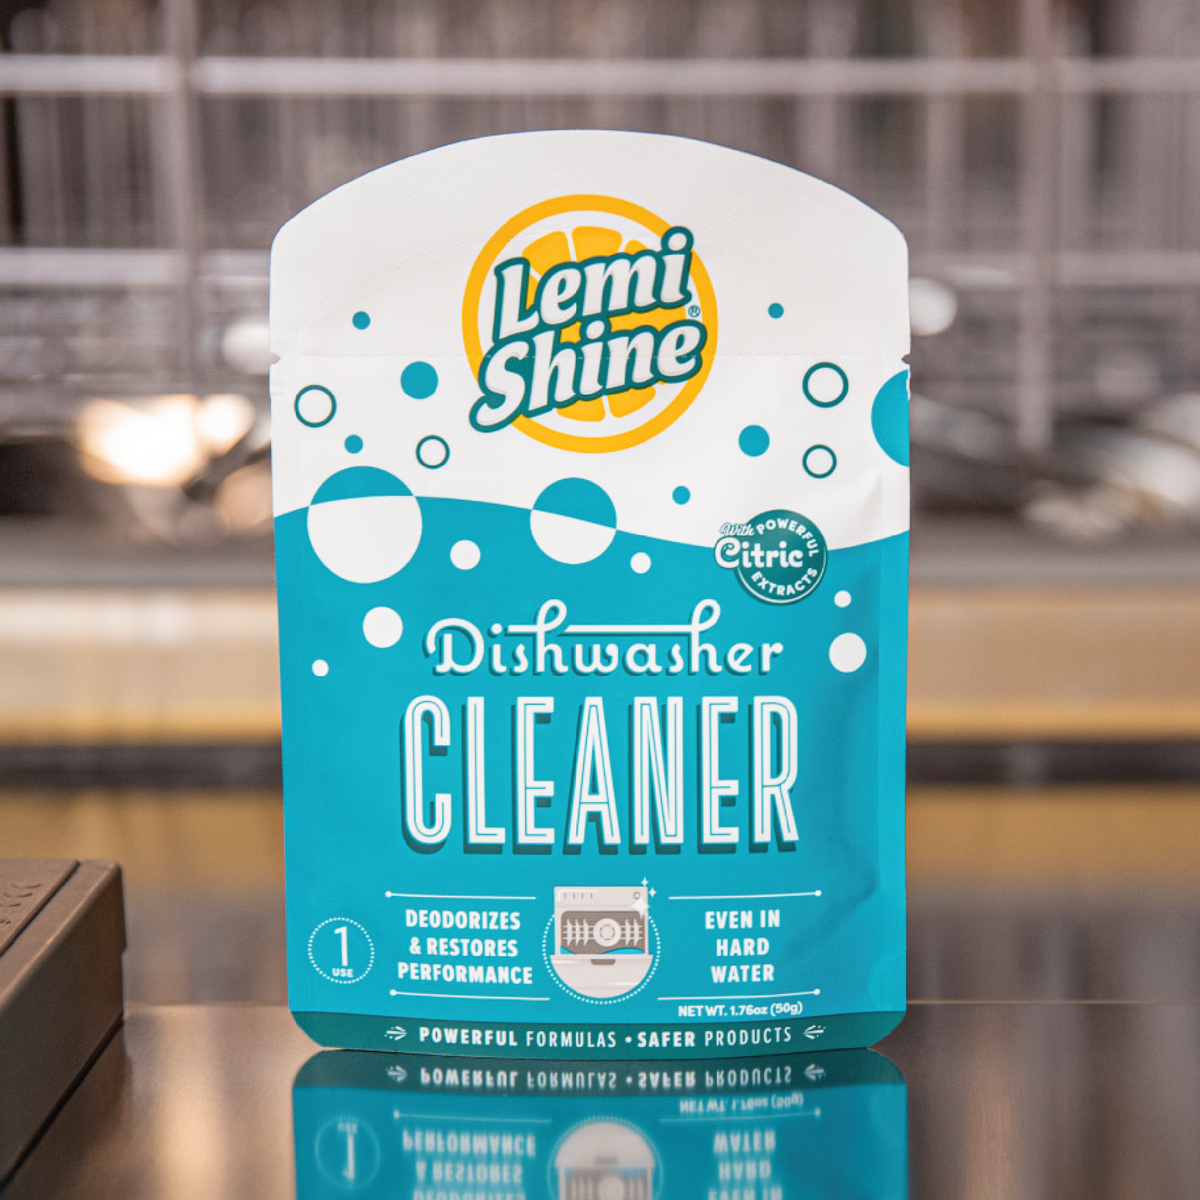 Cleaning Your Appliances with Lemi Shine